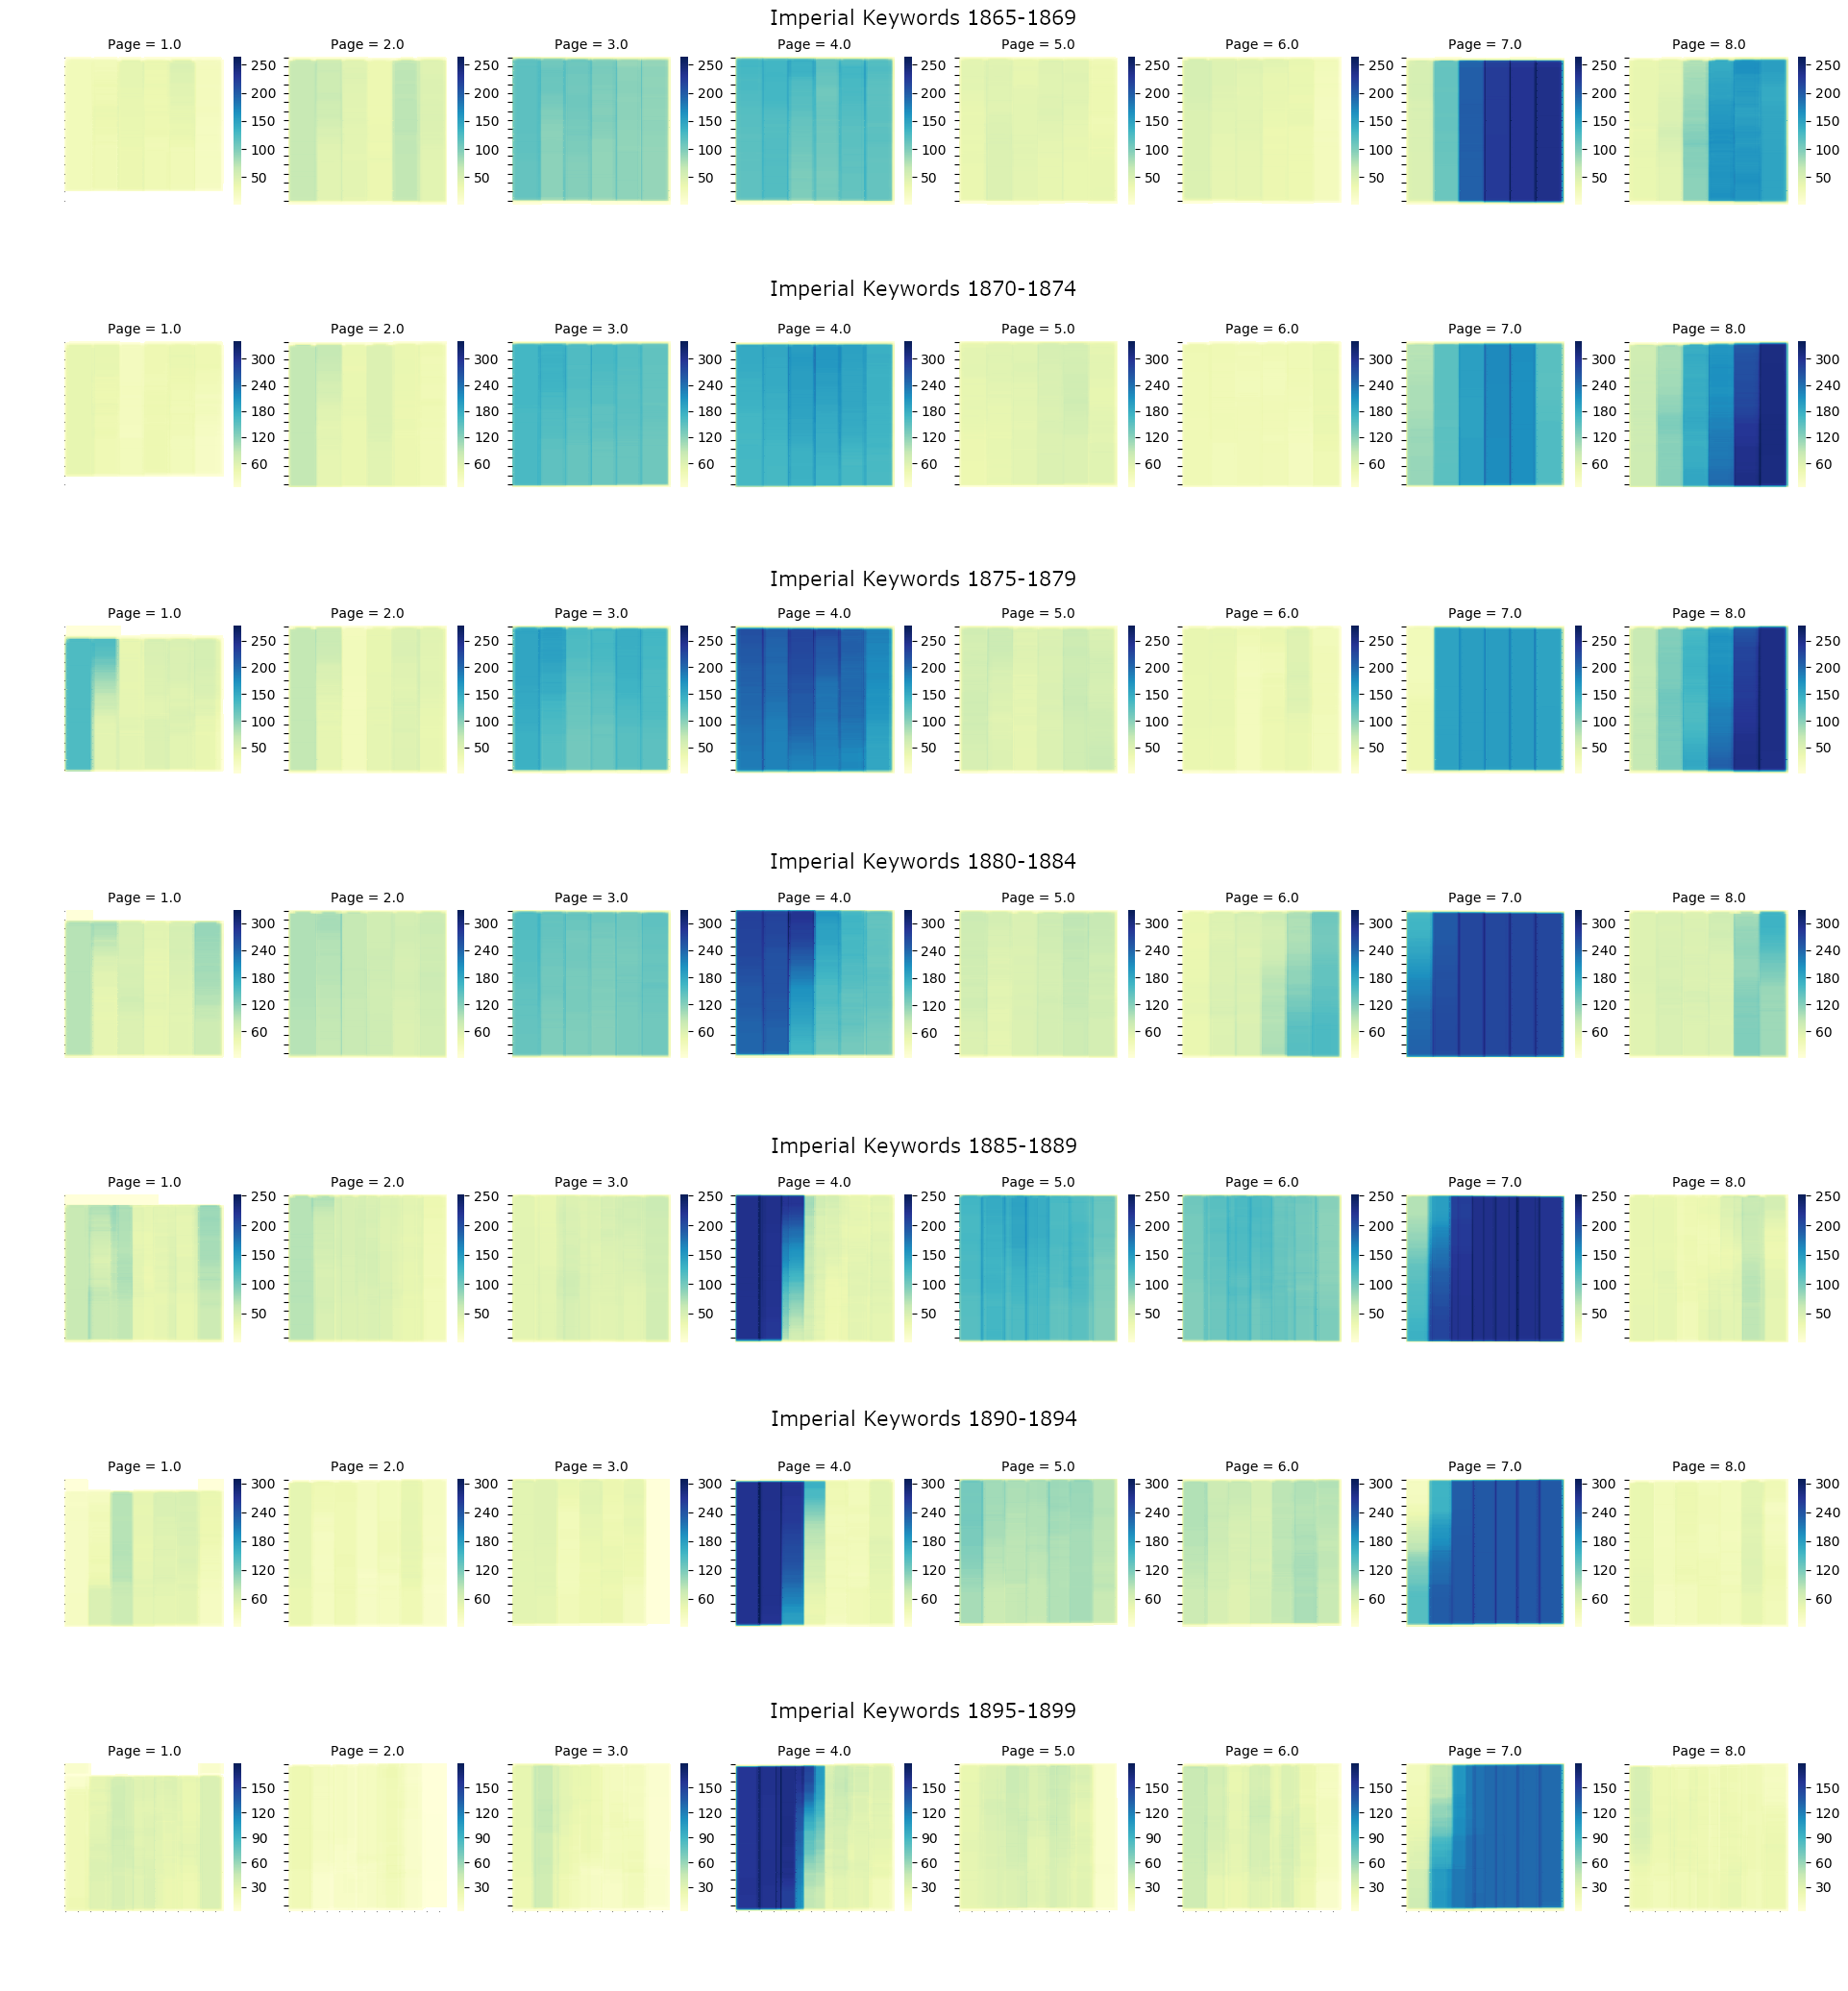 Series of heatmaps showing article placement with keywords. Organized sets of five years and representing years 1865-1899.